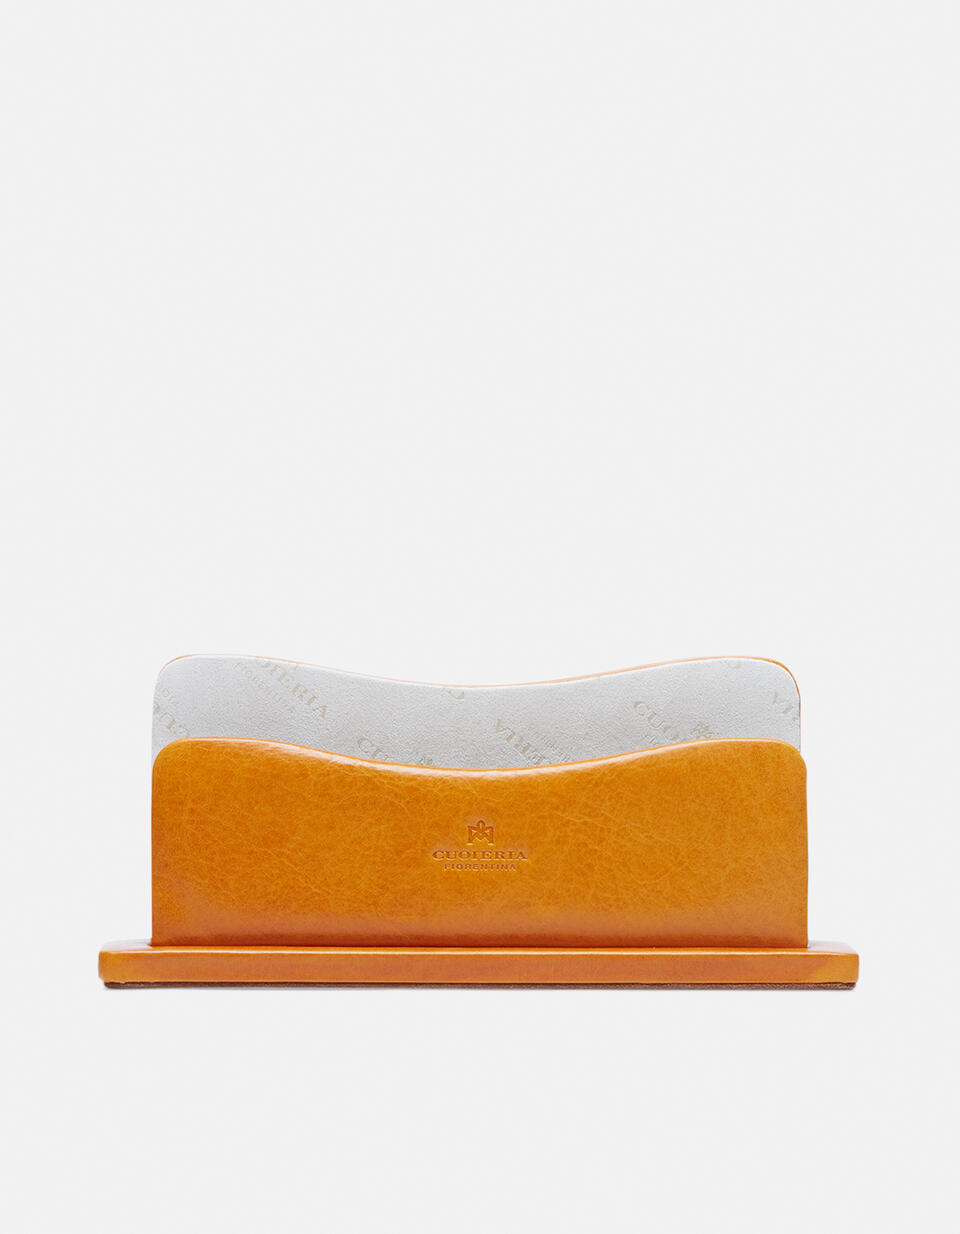 Vegetable tanned leather letter holder - Office | Accessories GIALLO - Office | AccessoriesCuoieria Fiorentina